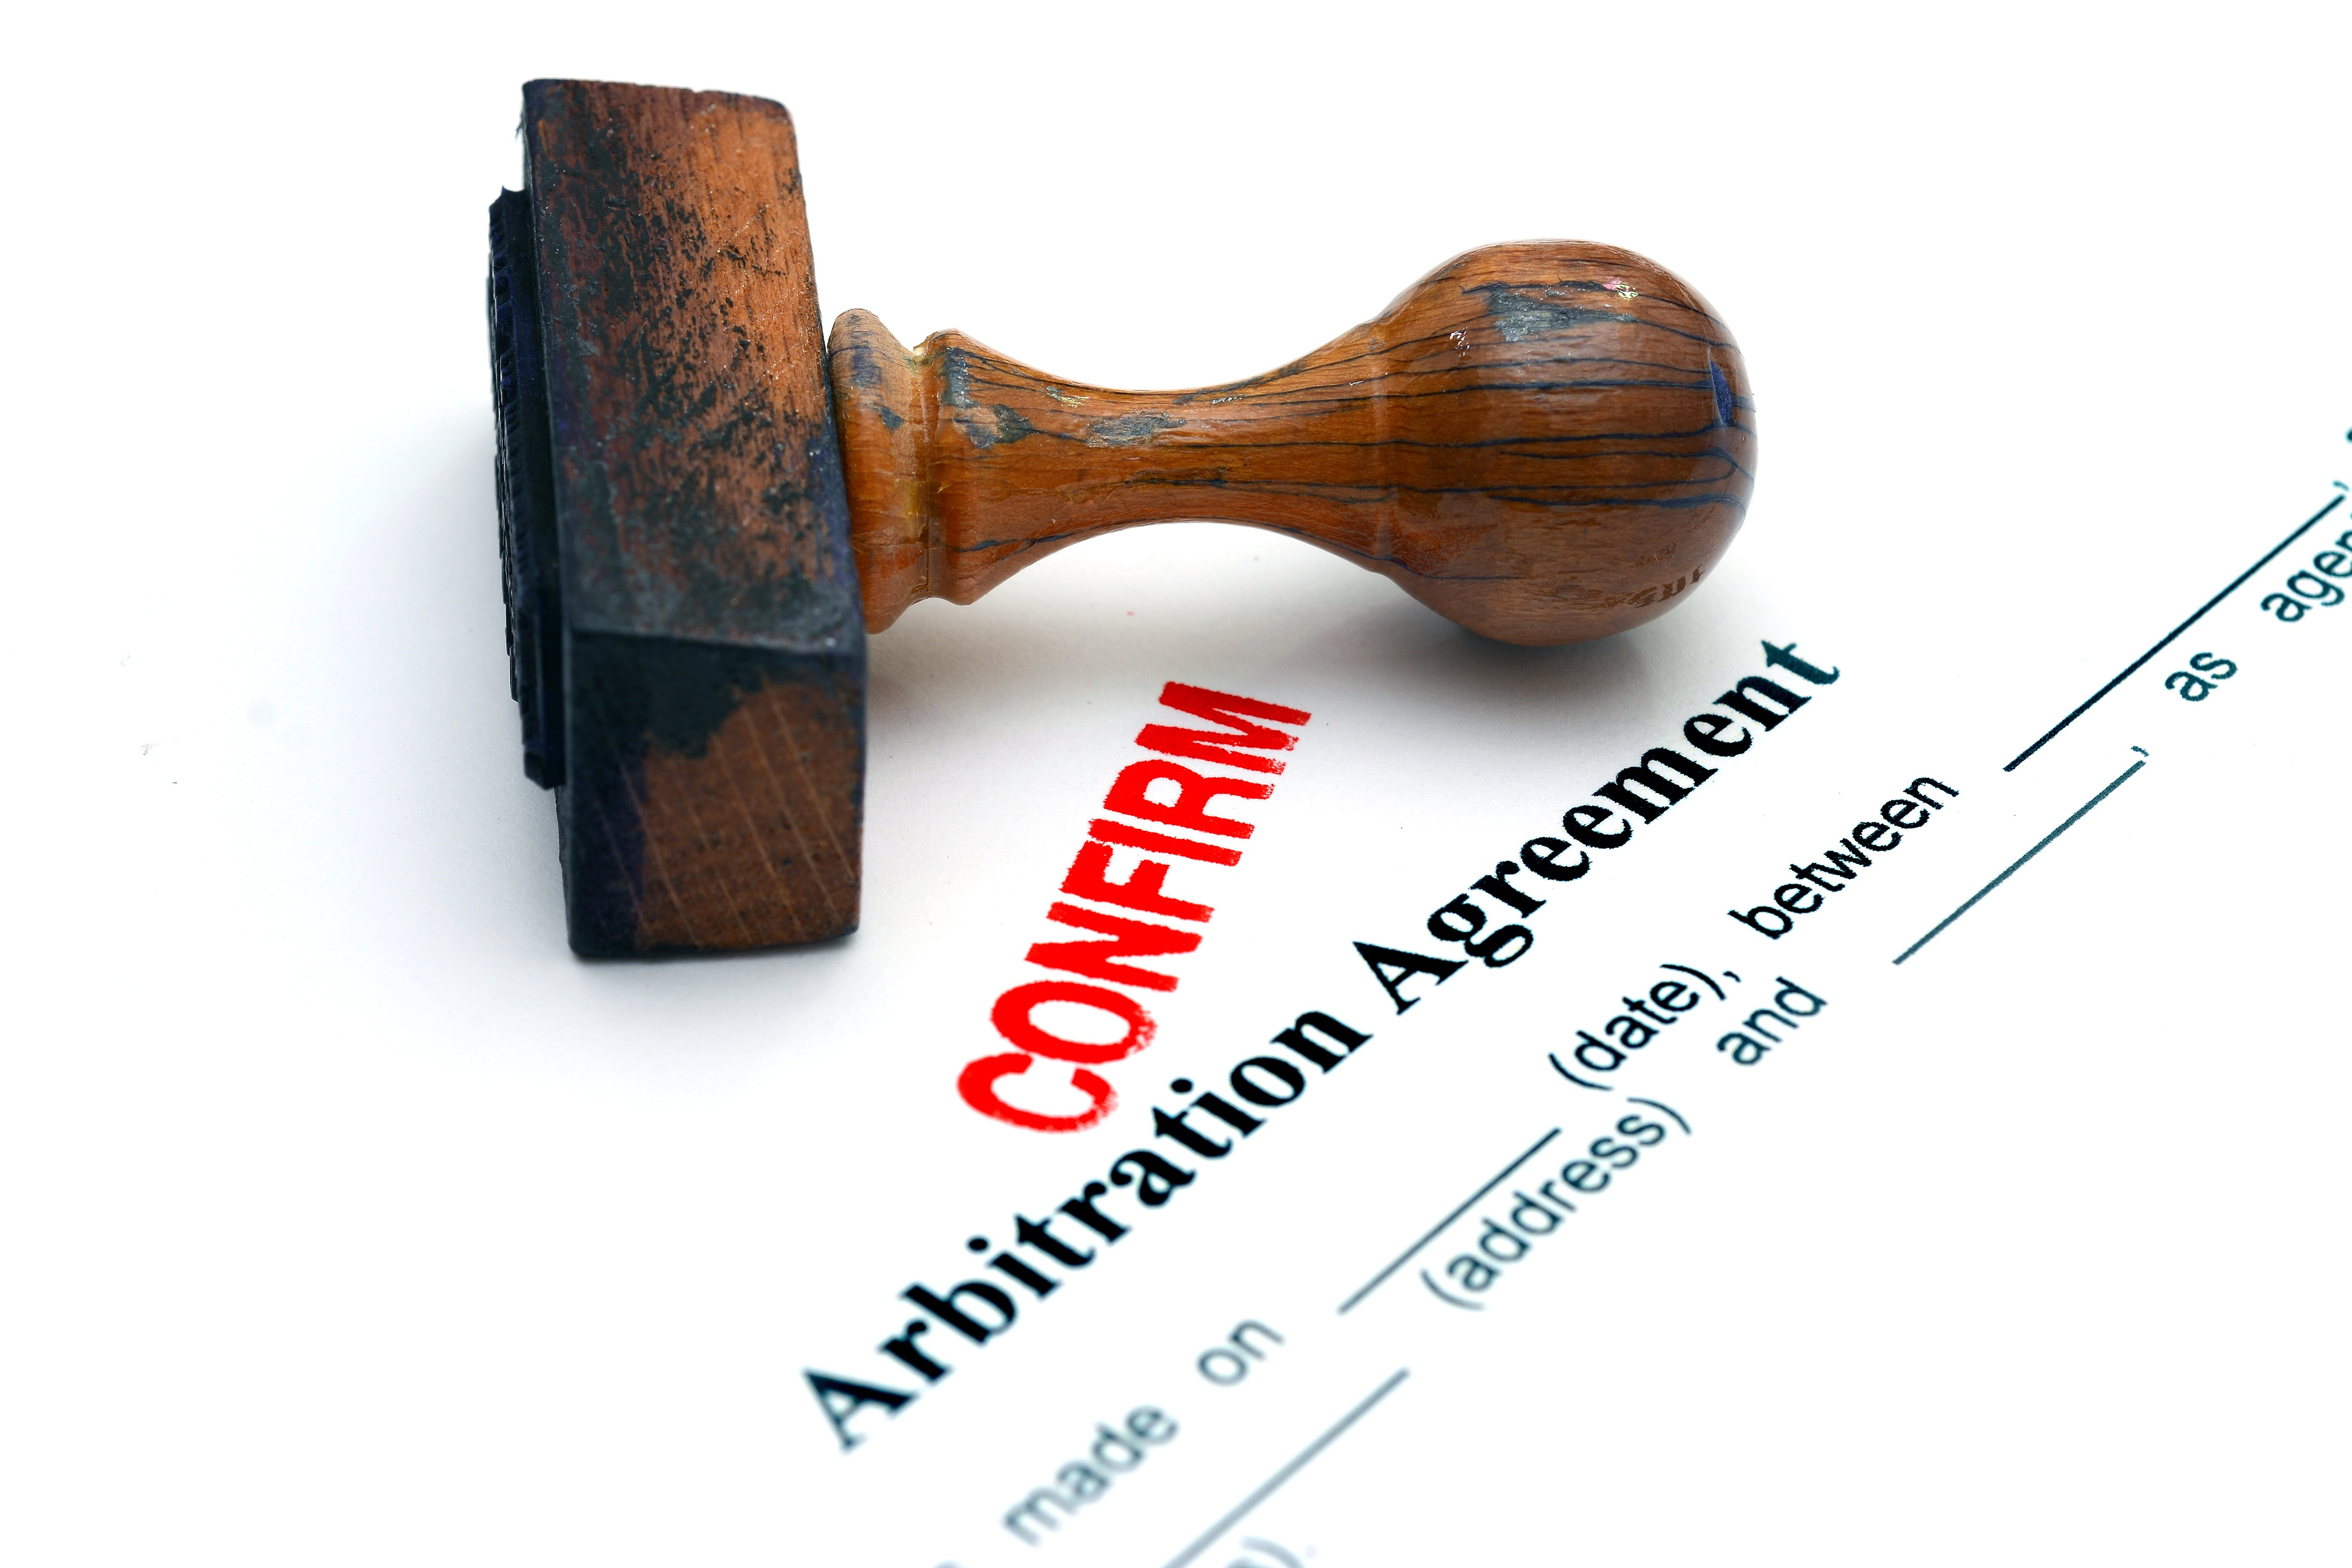 Agreement To Arbitrate Employers Should Consider Prevailing Party Language In Arbitration